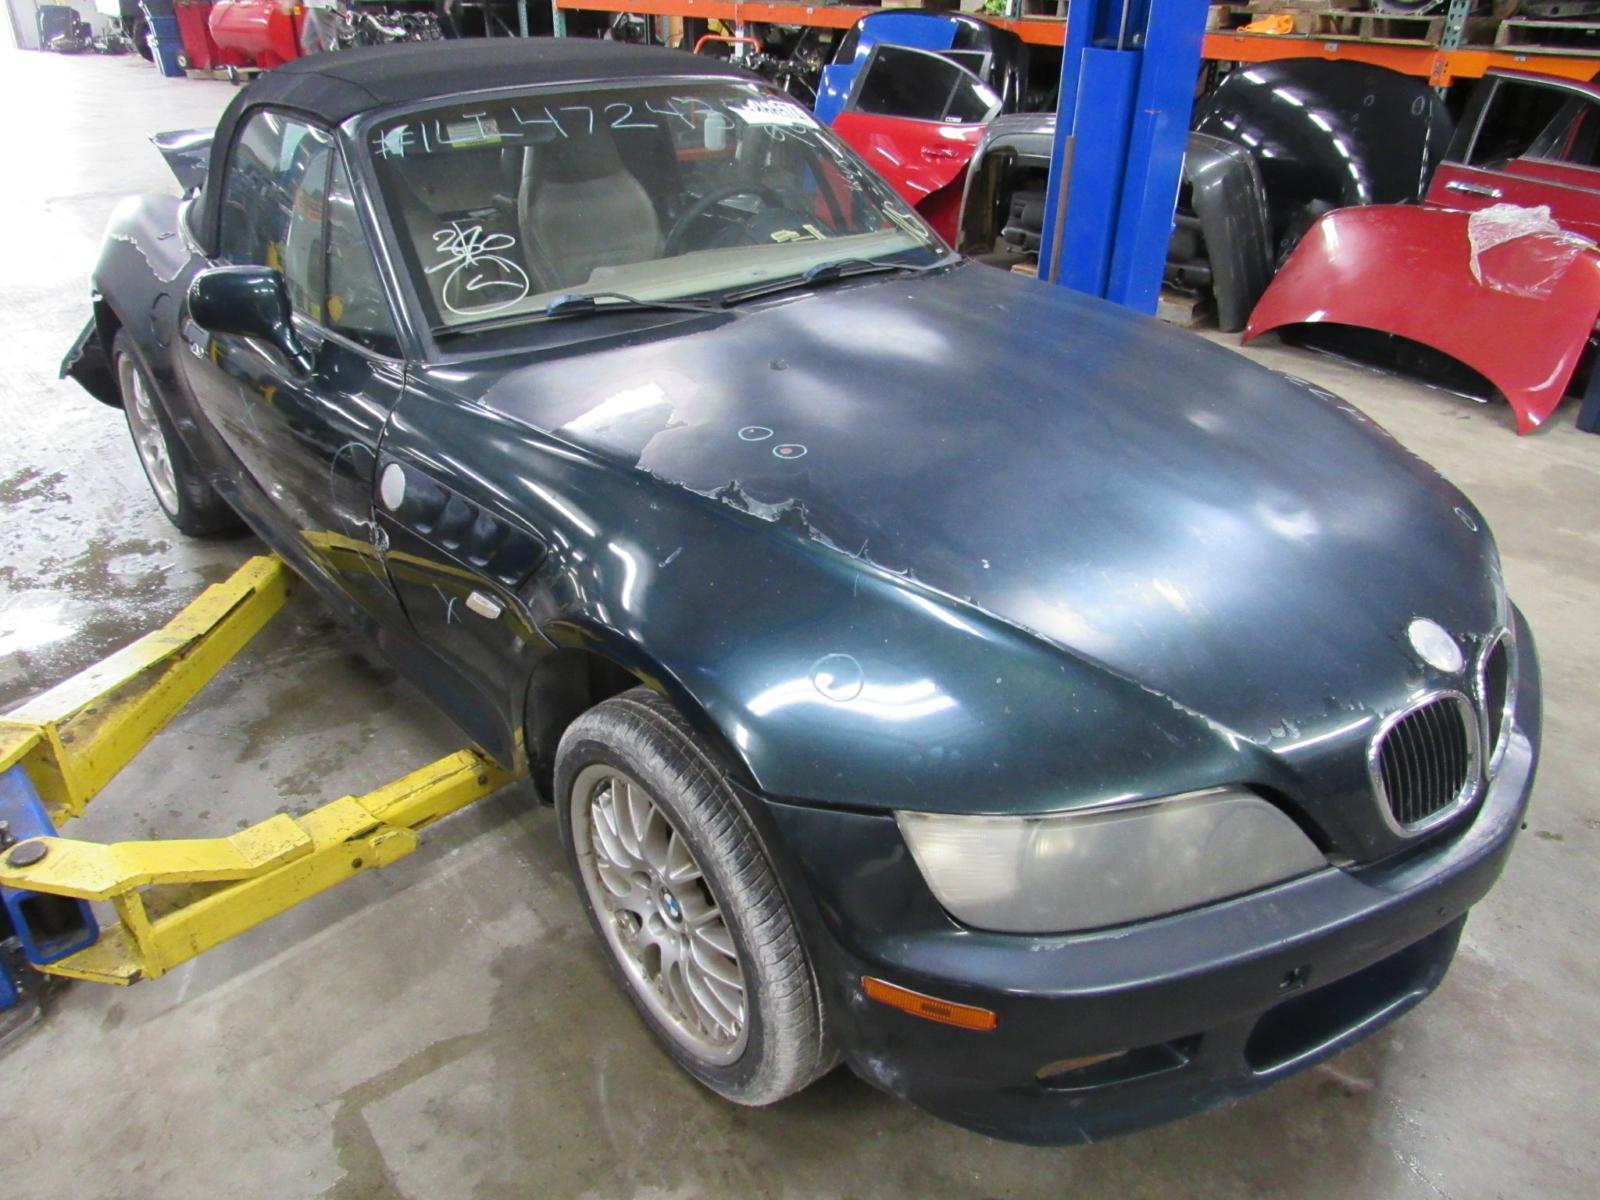 01 BMW Z3 M54B30 3.0 83K Miles In For Parts 5-14-24